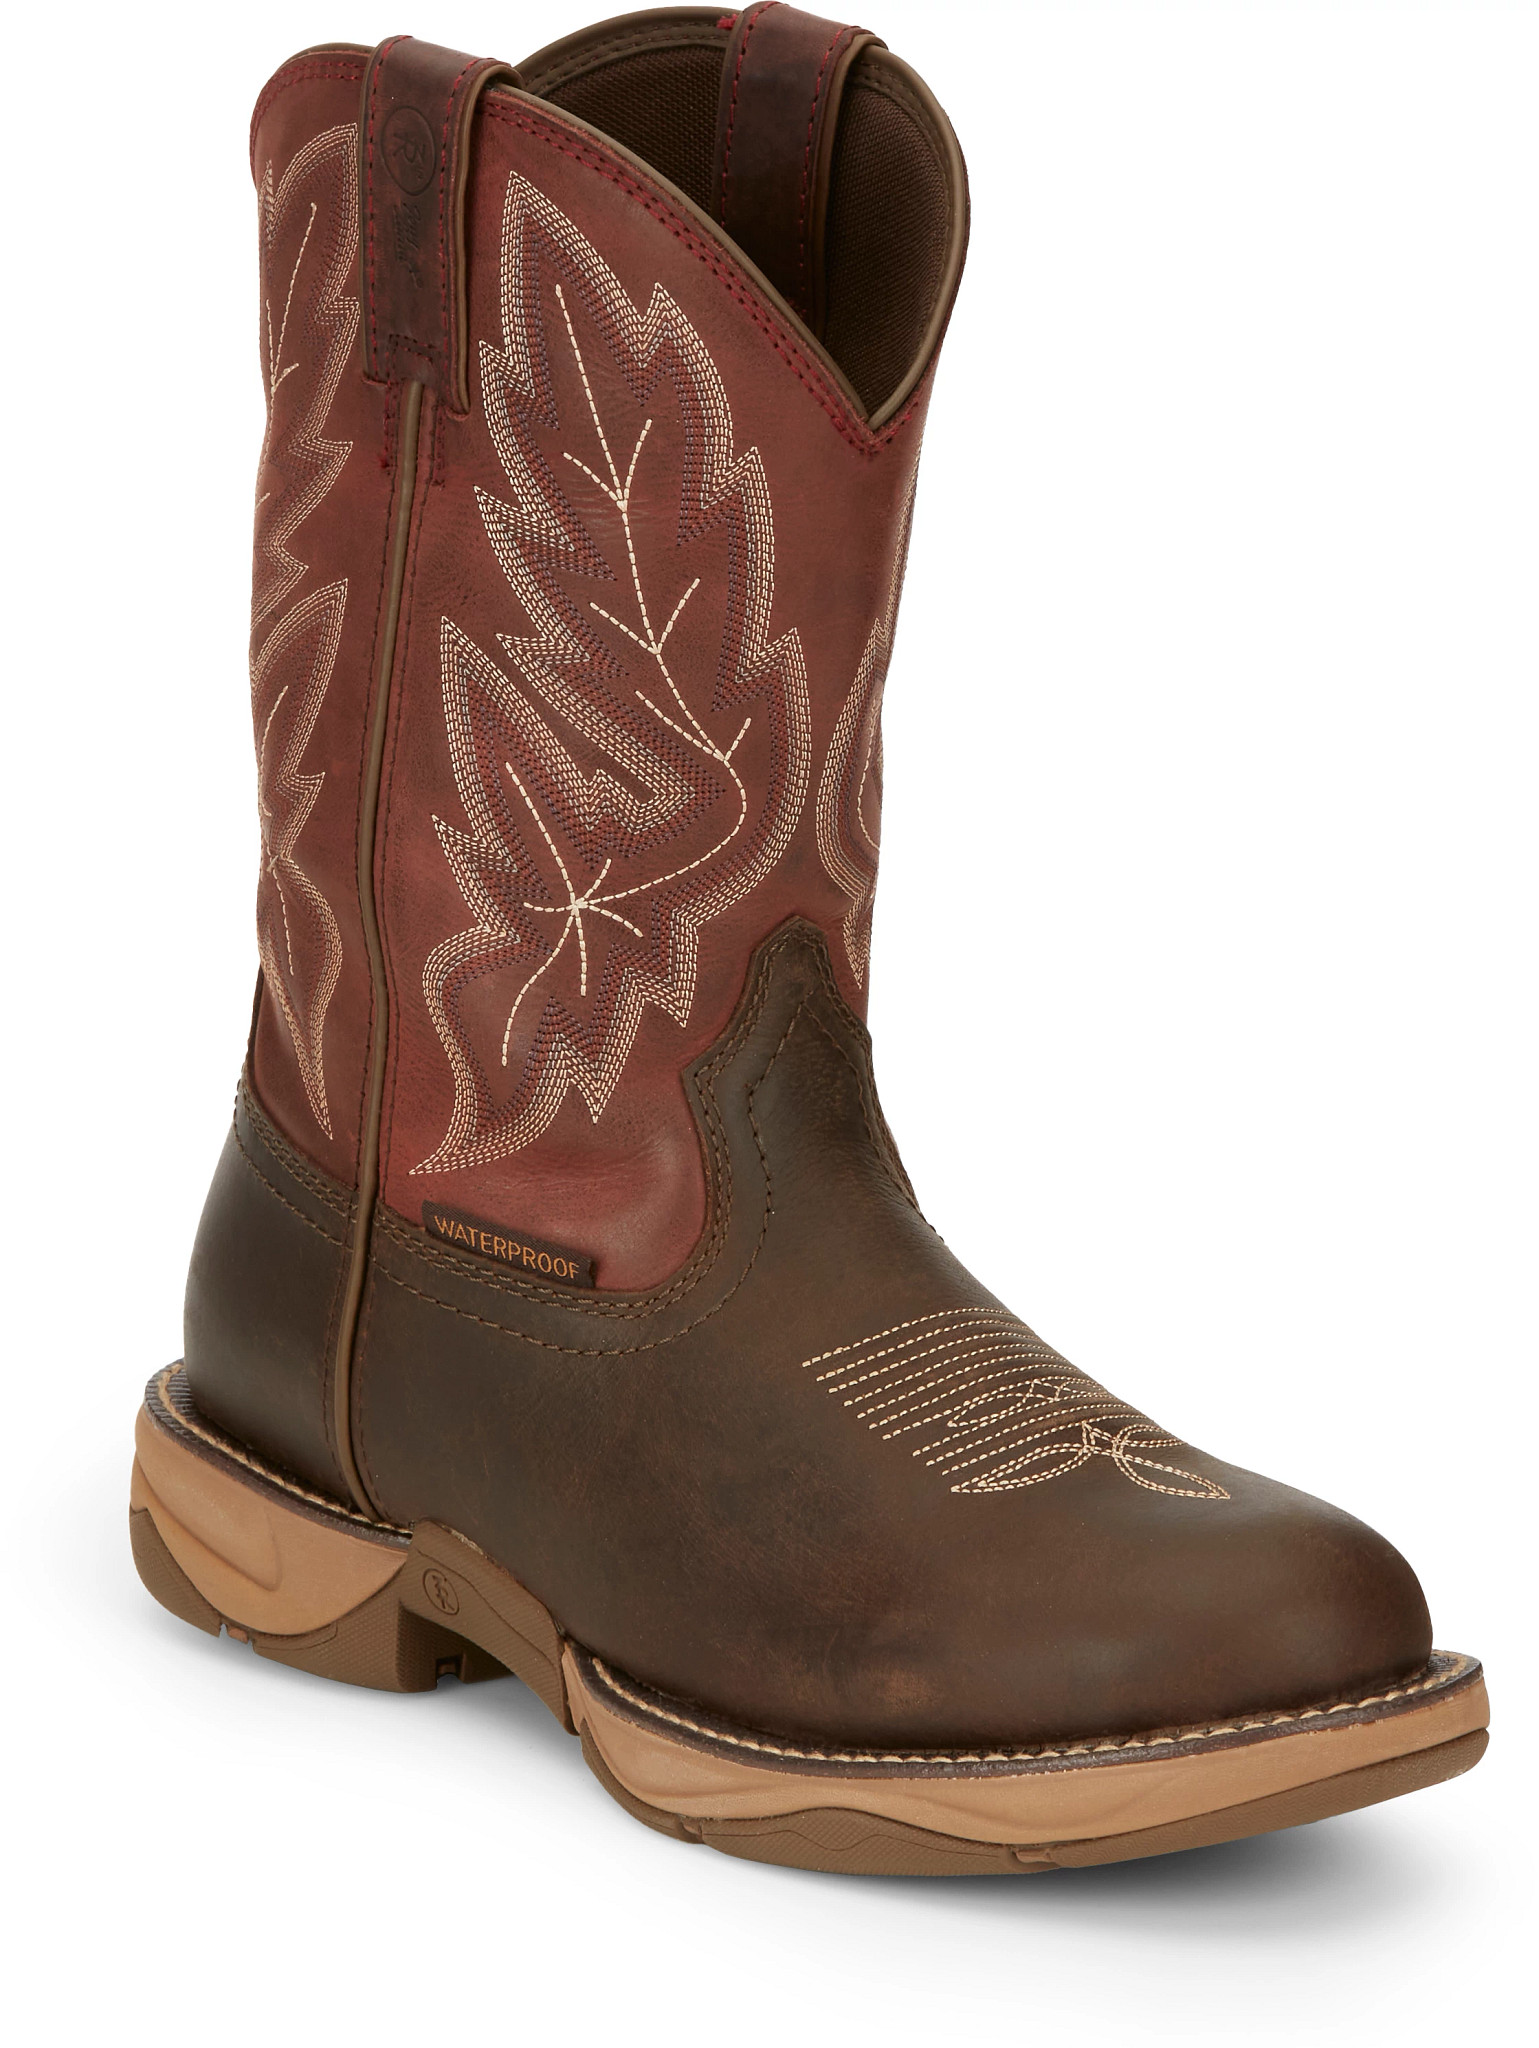 Men's Work Boots | Pull On Boots | Tony Lama